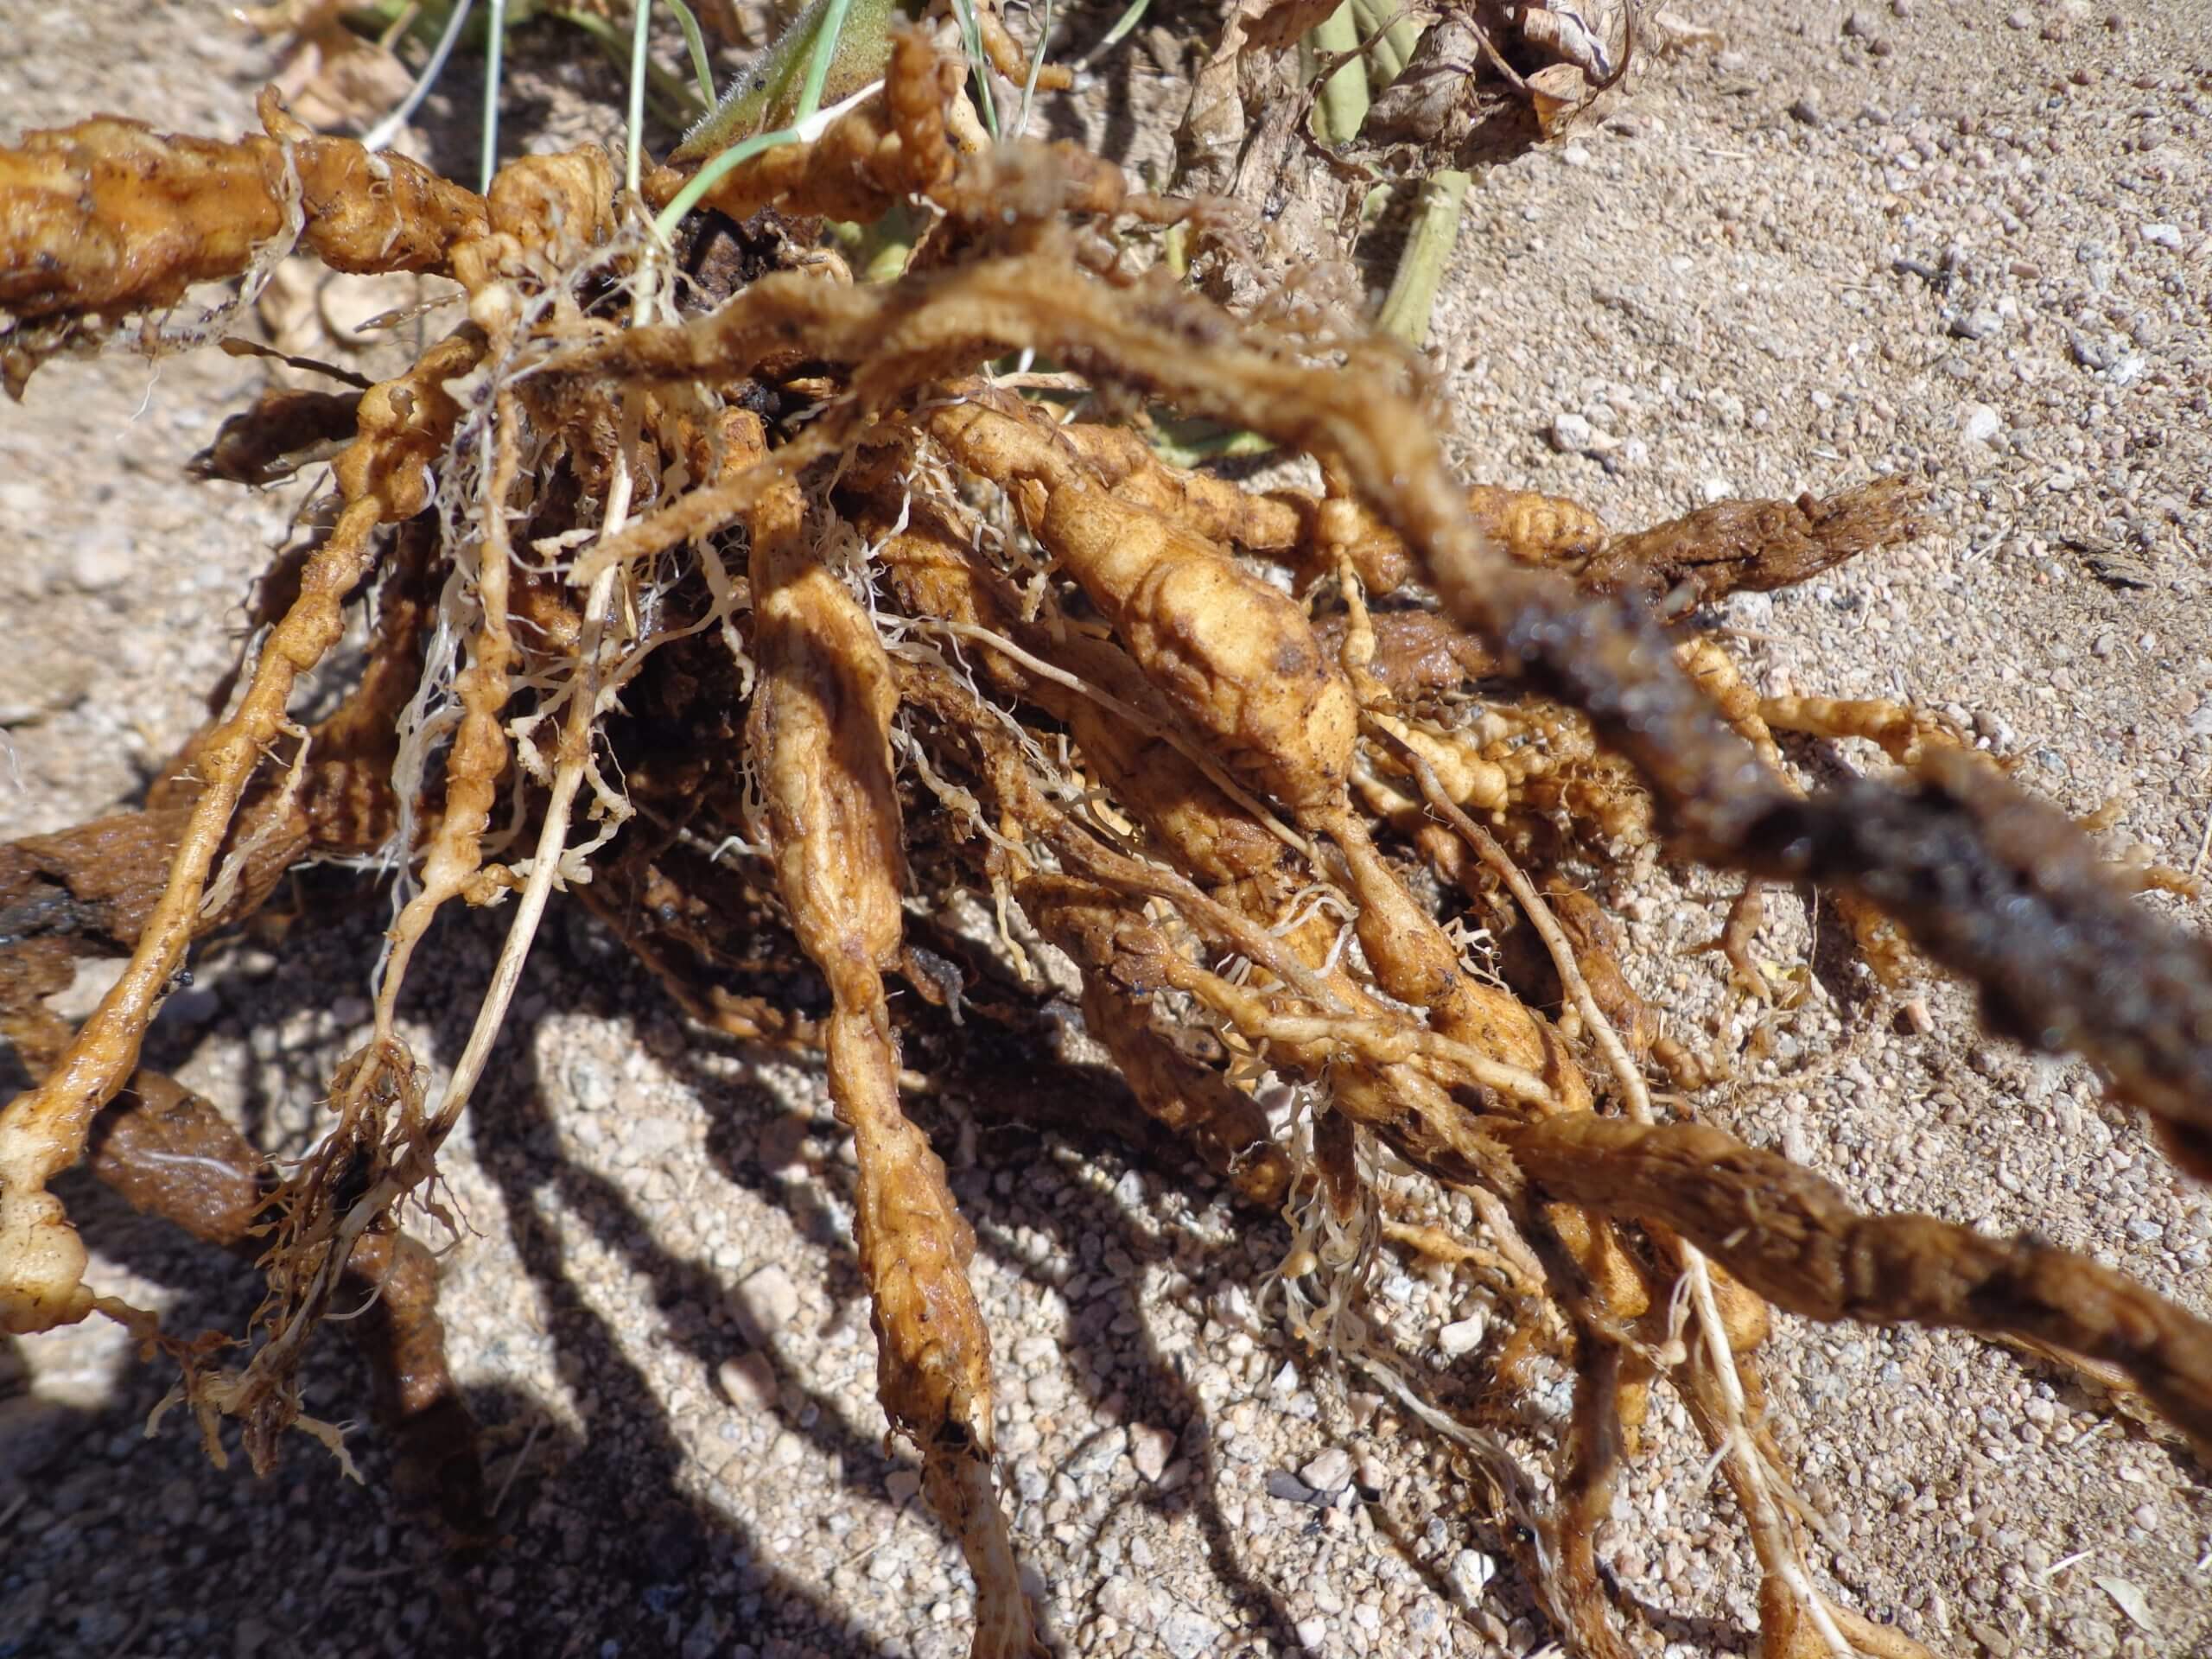 Roots knots or galls in tomato root systems is a sure sign of root knot nematodes.